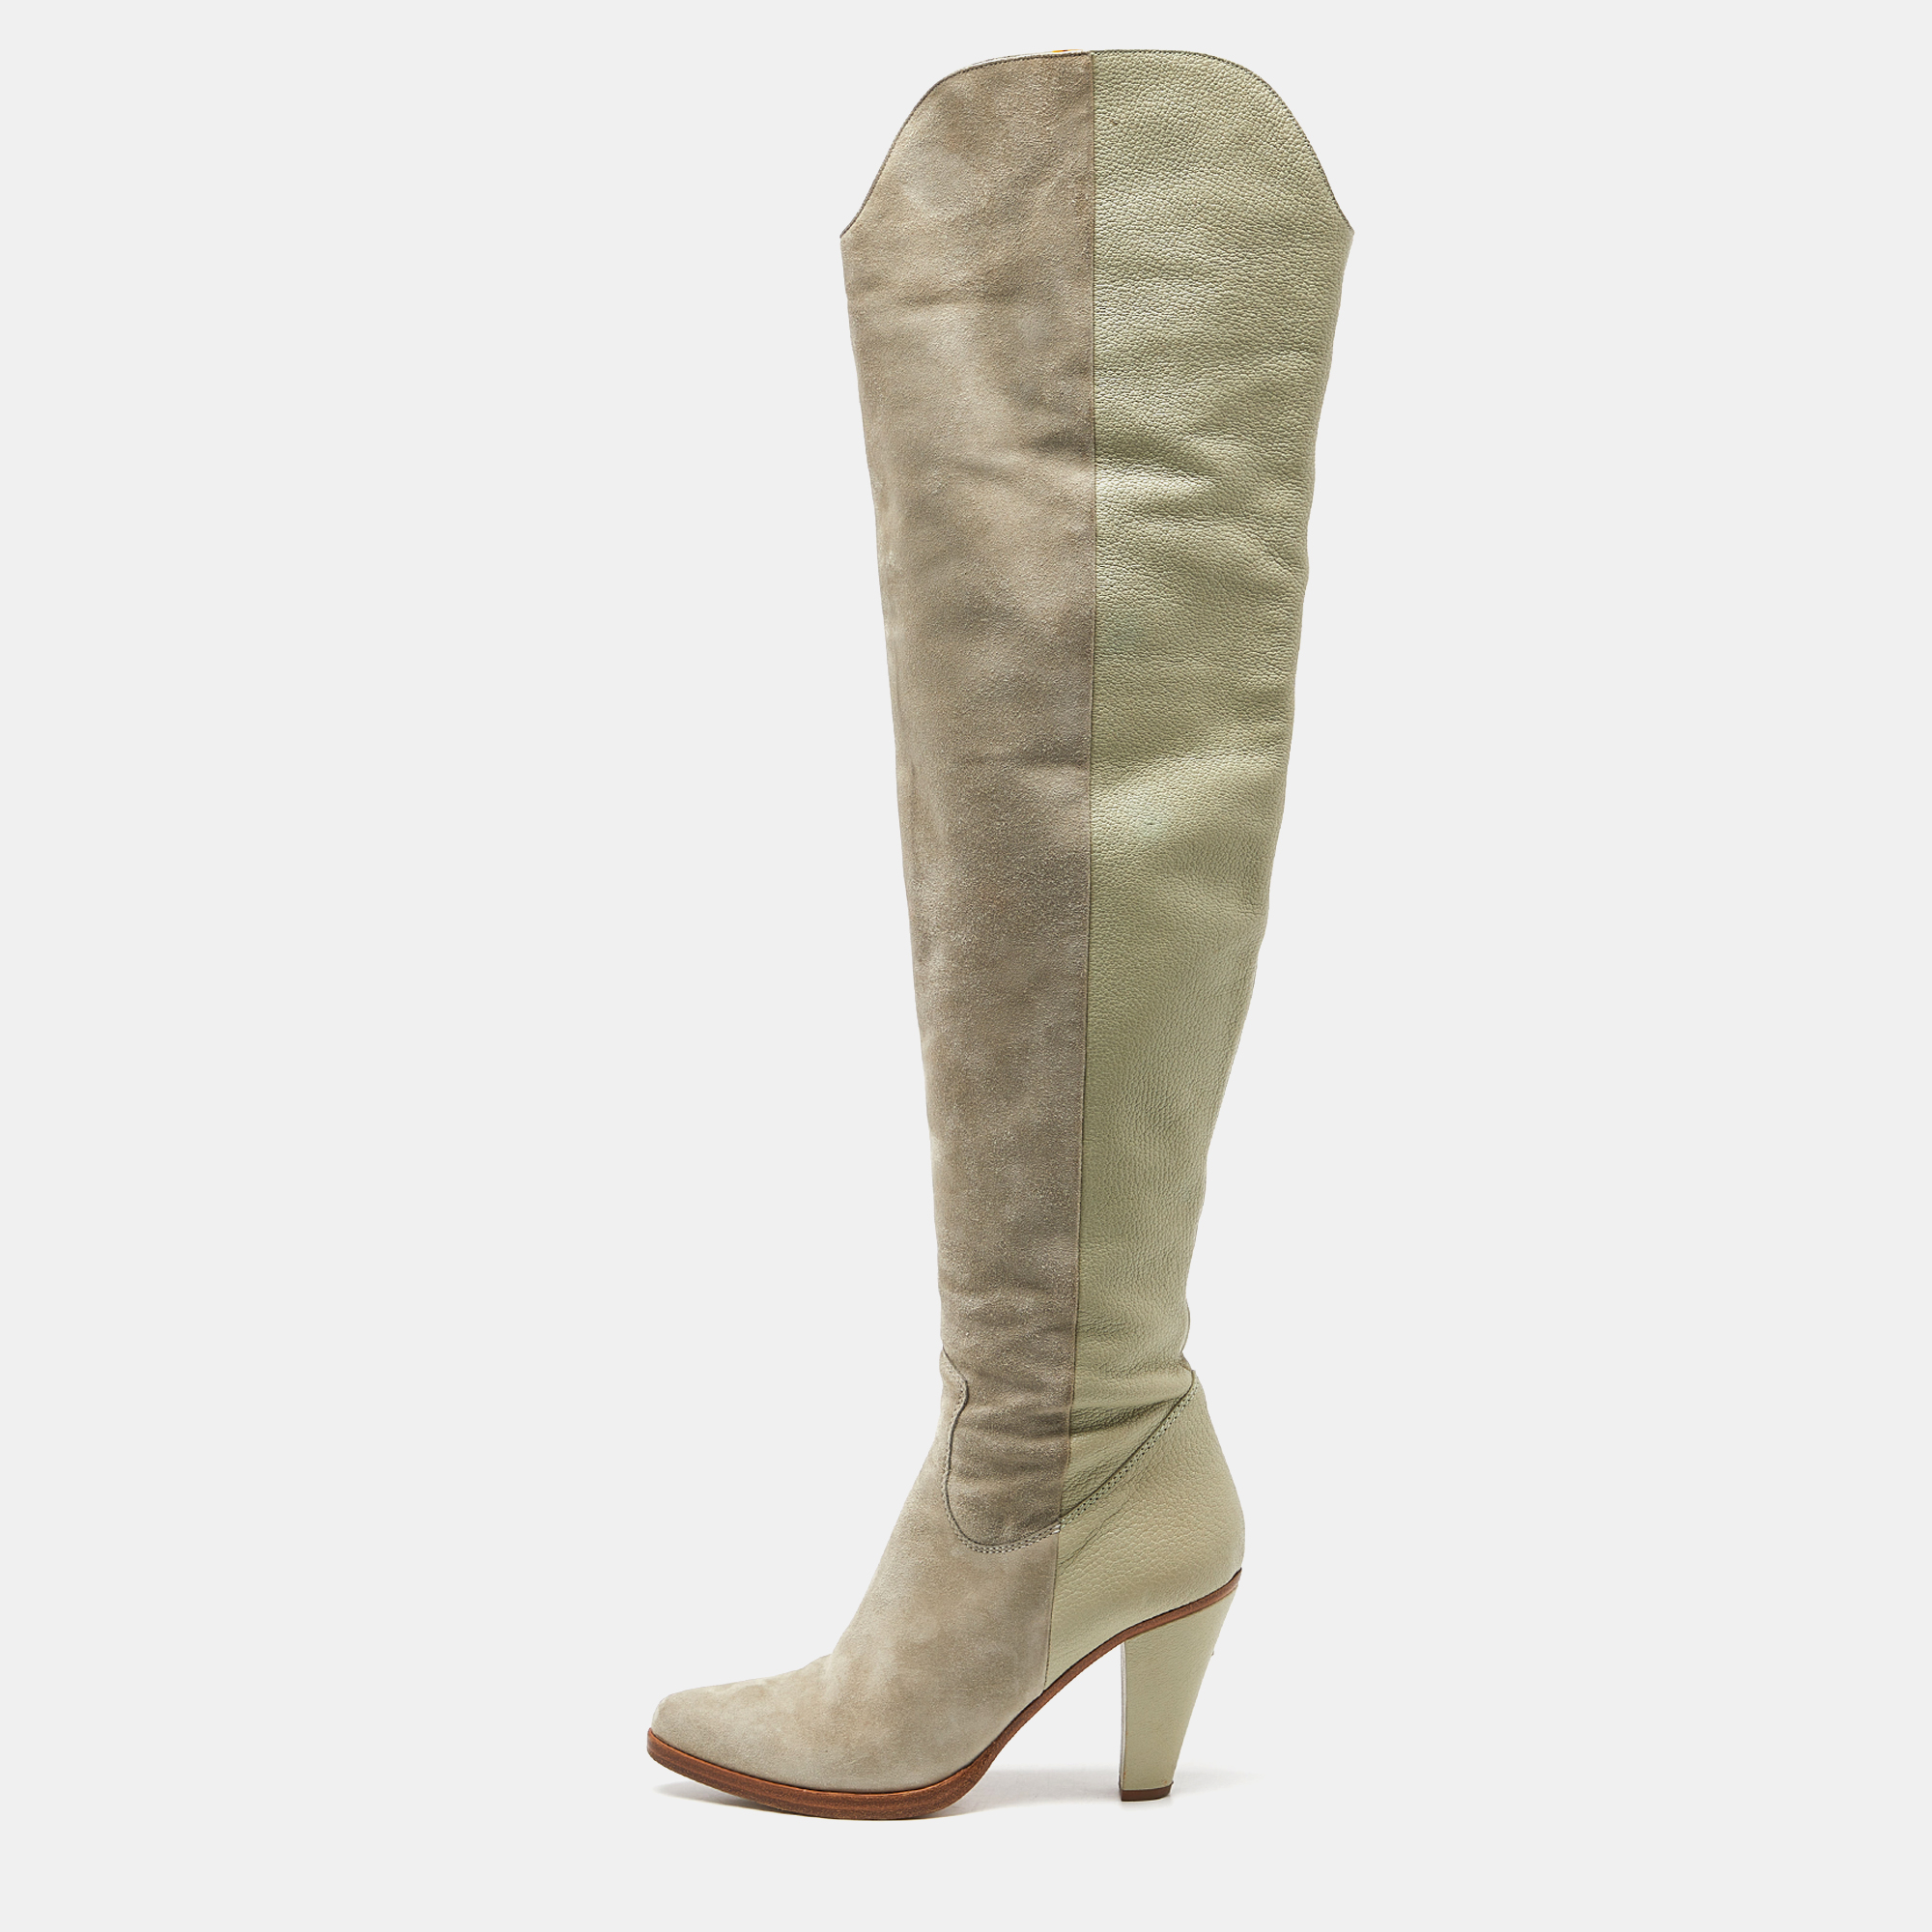 Pre-owned Chloé Grey Suede And Leather Over The Knee Length Boots Size 39.5